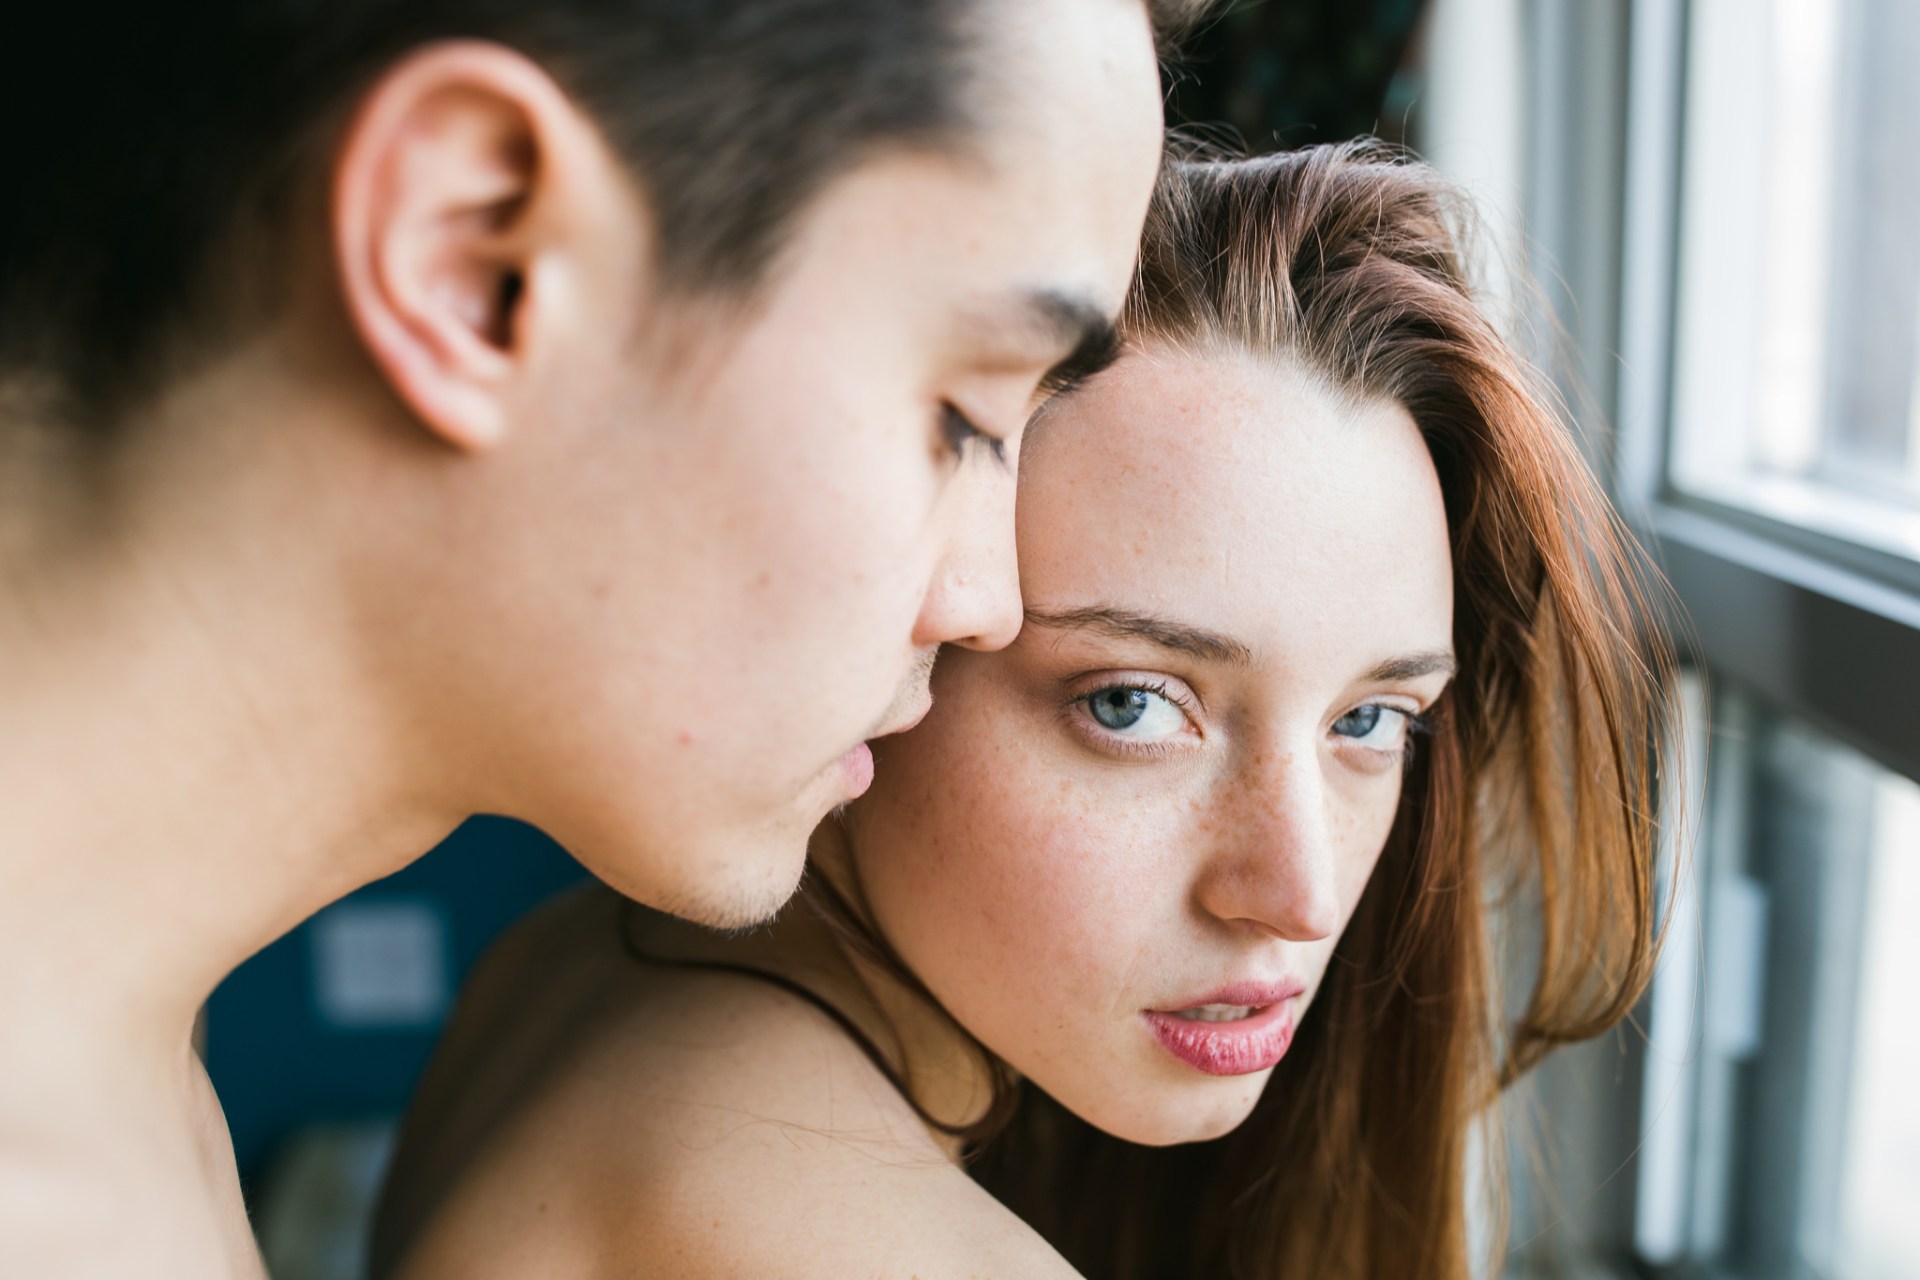 How To Flirt With A Girl (Because Sending Mixed Signals Is Overrated)